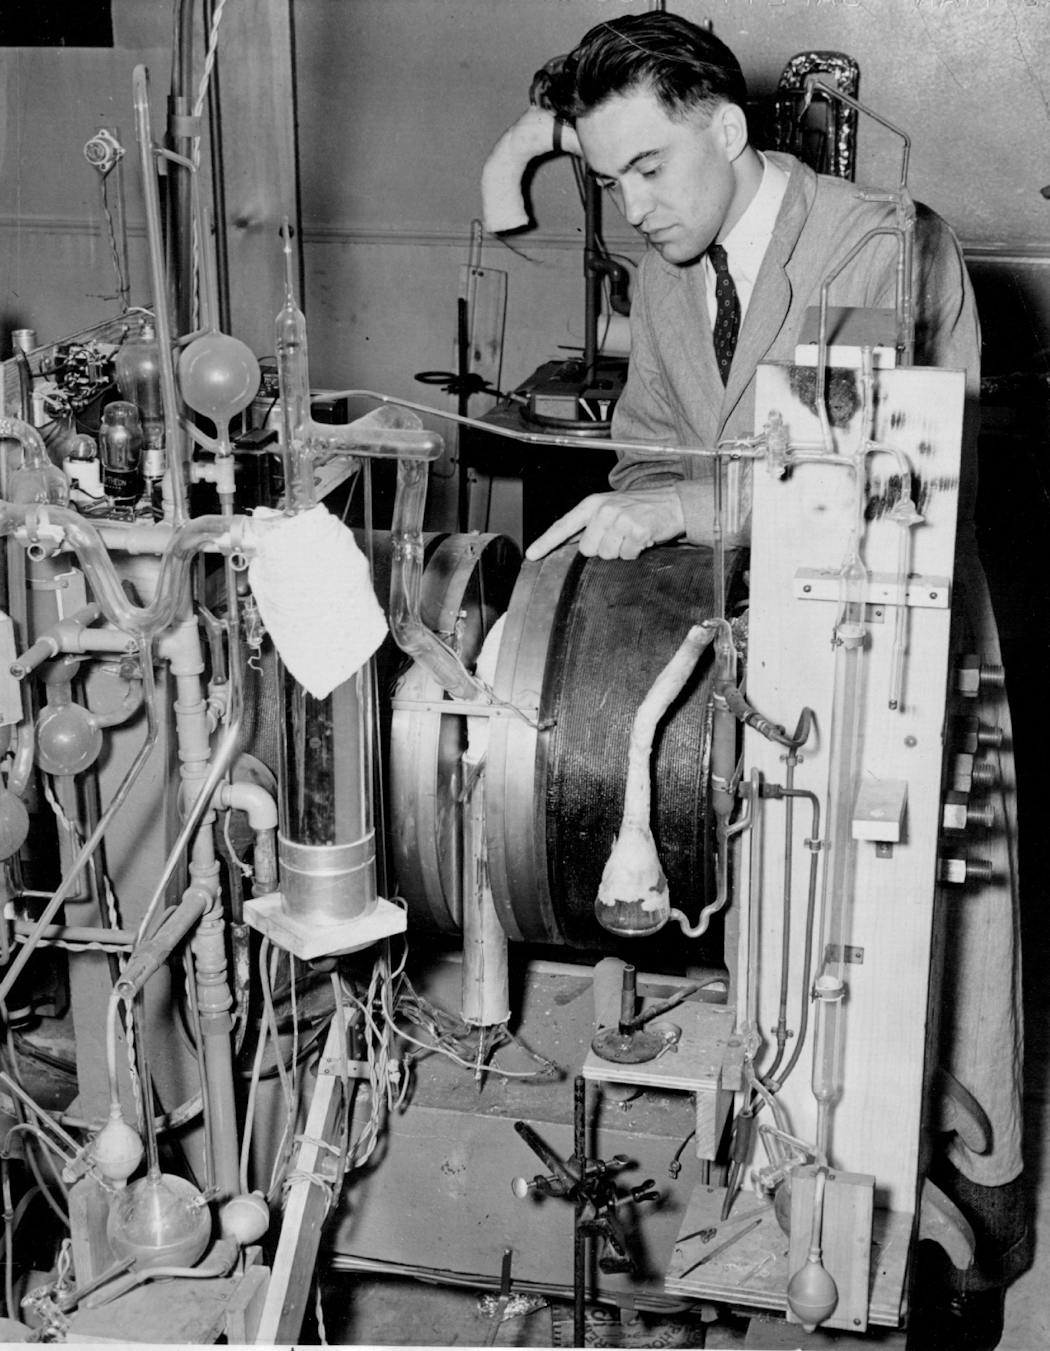 University of Minnesota Physicist Alfred Nier working on a mass spectrometer in 1940.